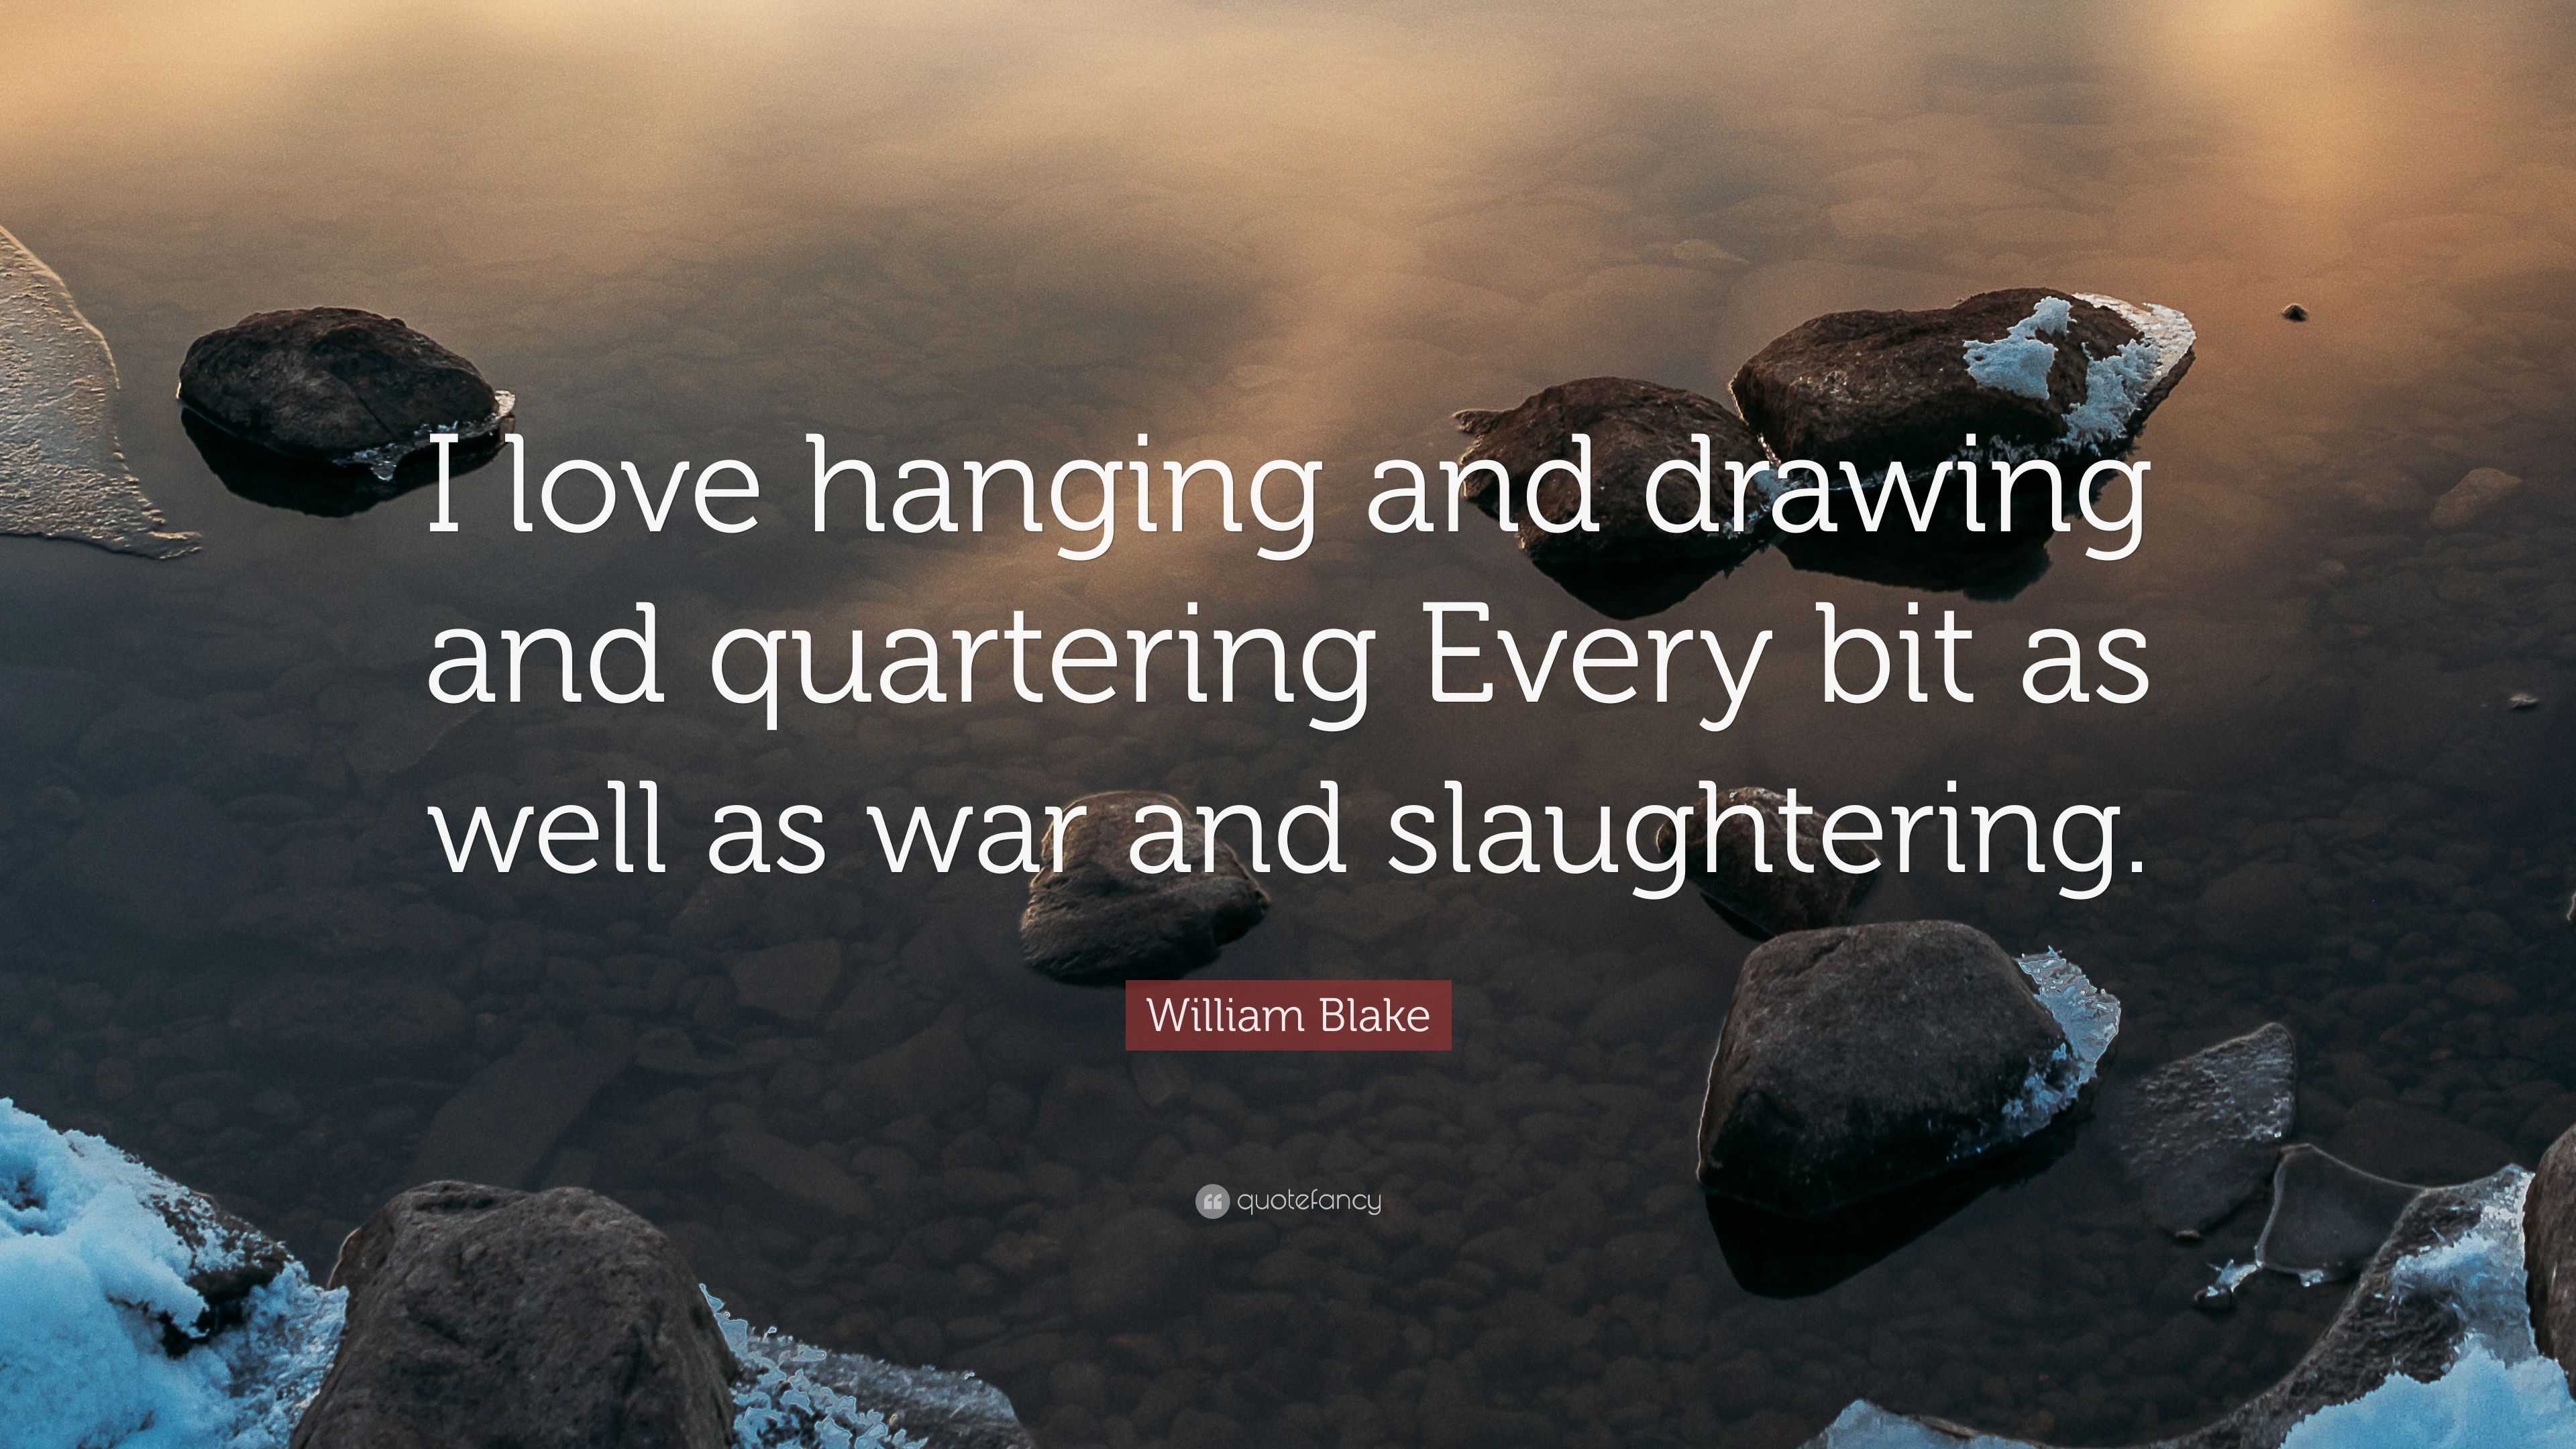 For The Romantic Souls: Discover The Most Beautiful Love Quotes [+200]